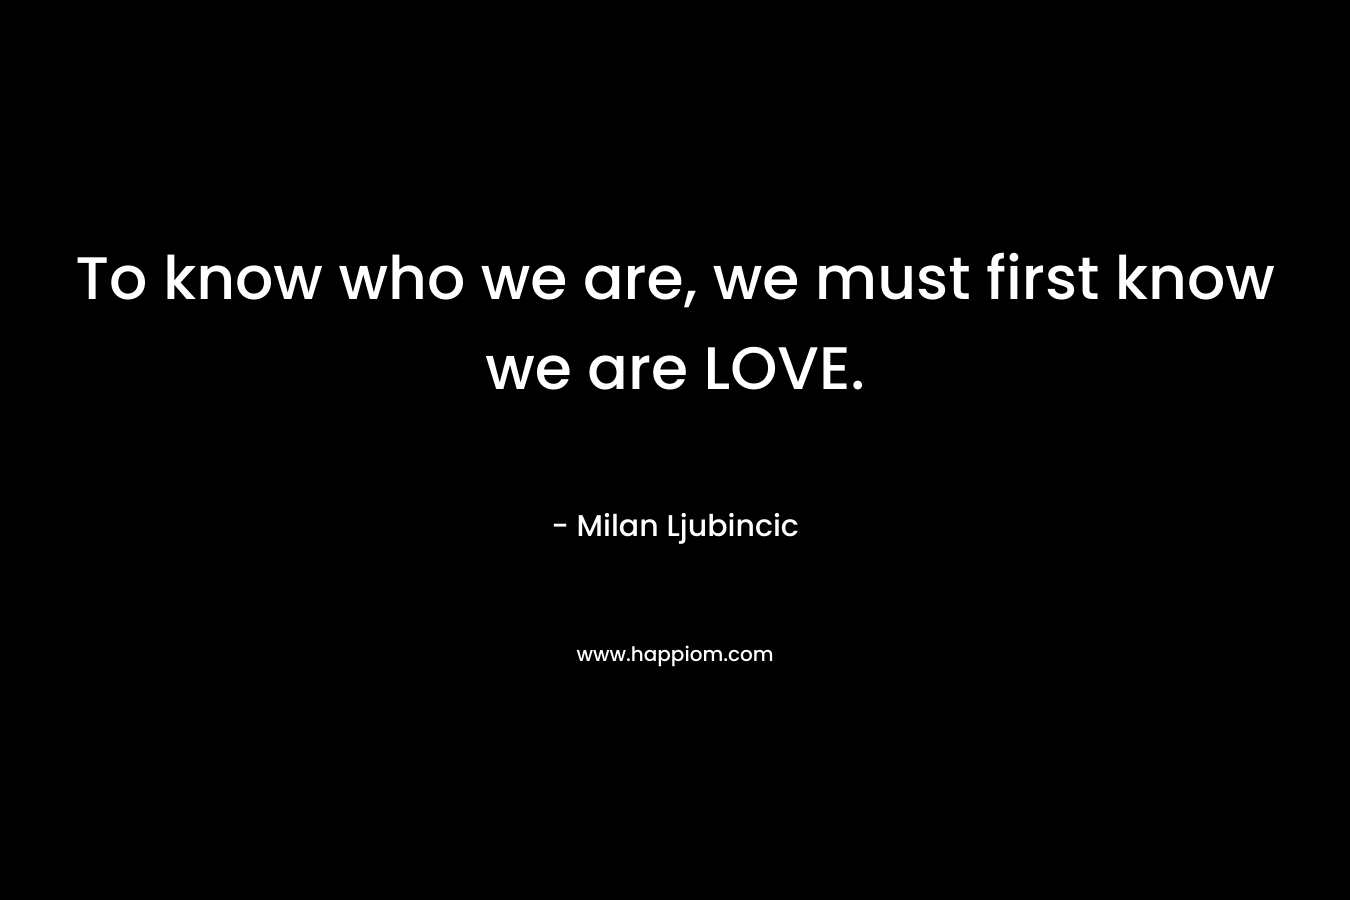 To know who we are, we must first know we are LOVE.